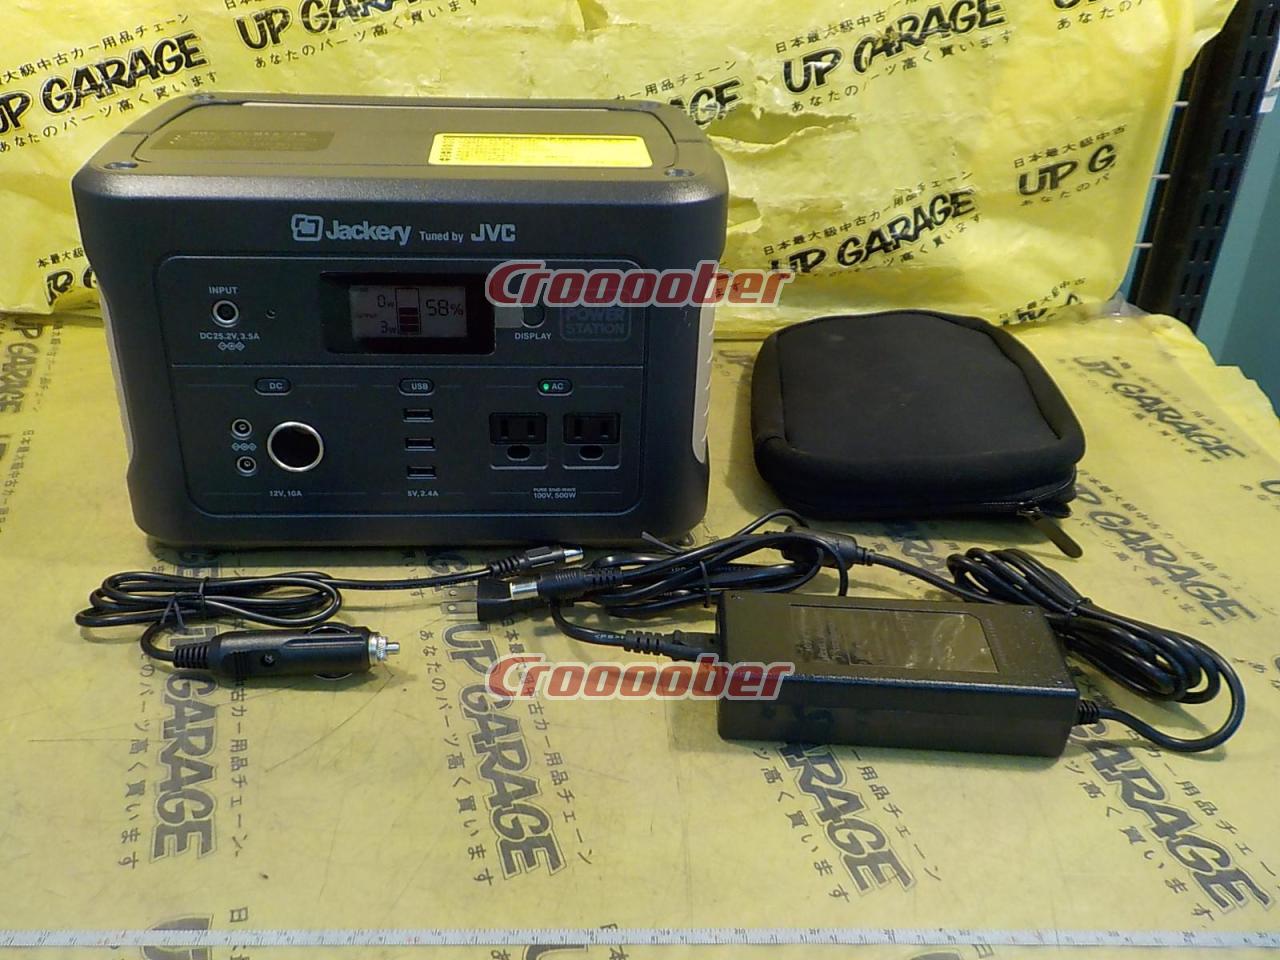 Jackery Tuned By JVC Portable Power BN-RB5 | Other Parts | Croooober